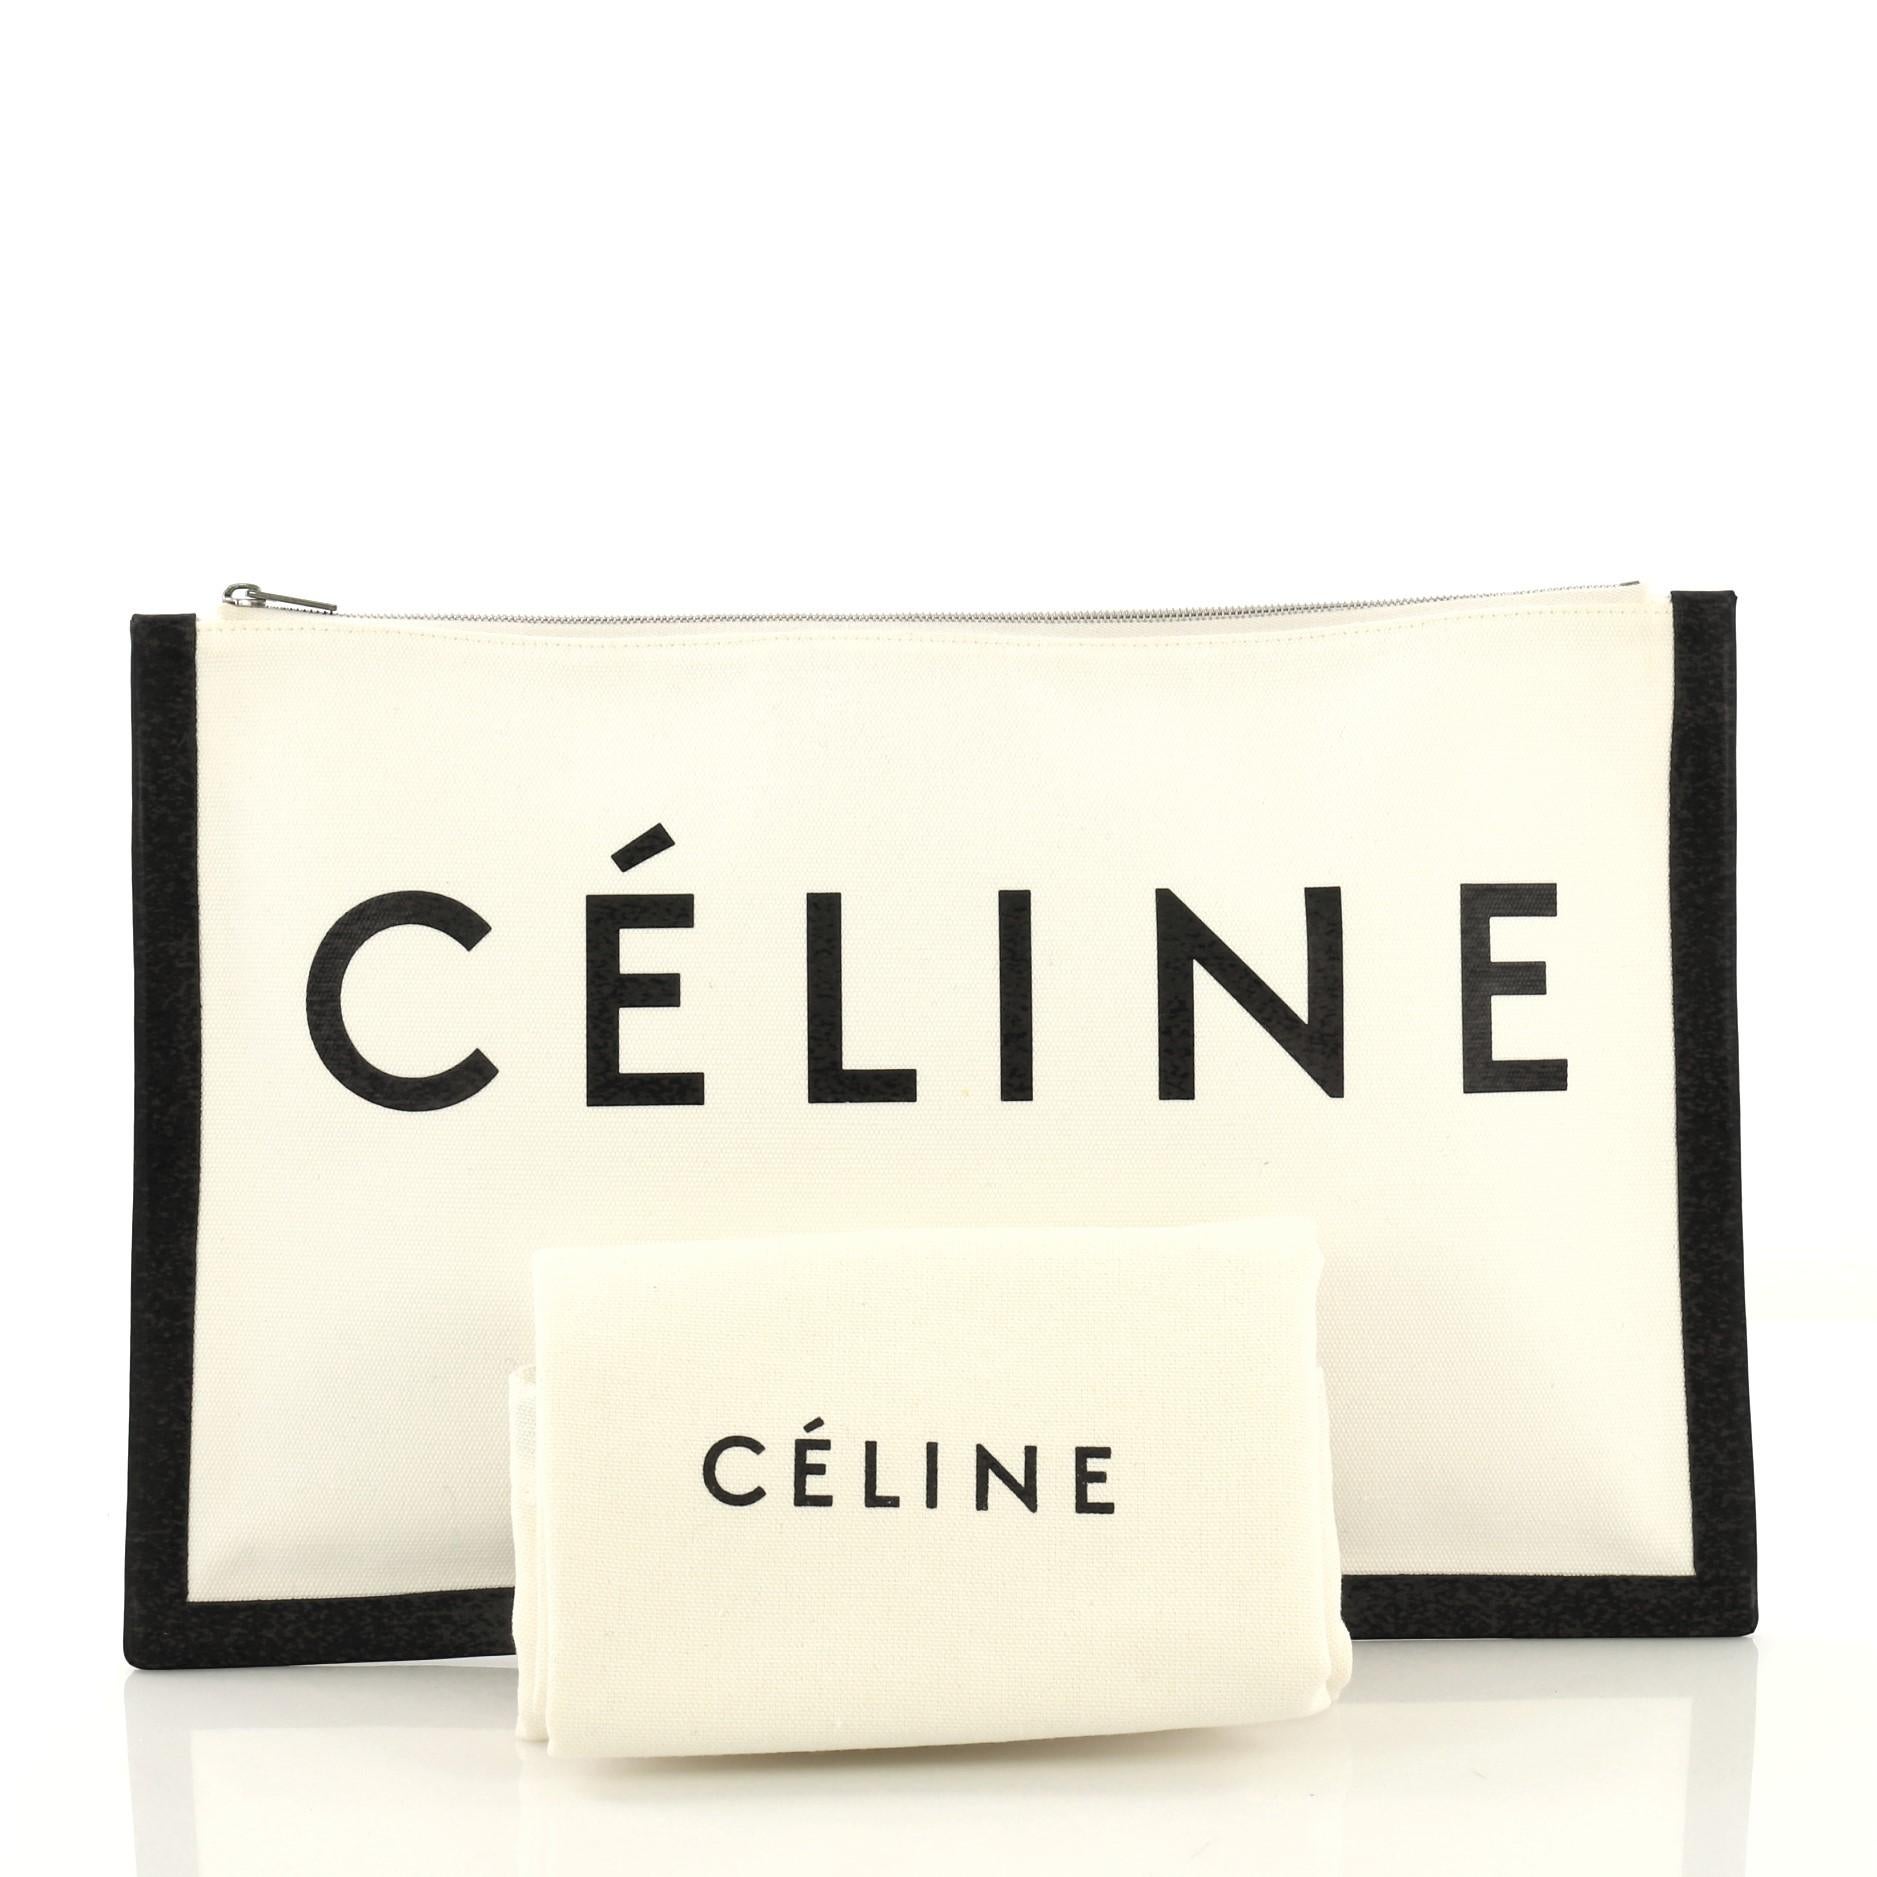 This Celine Made In Pouch Printed Canvas Large, crafted in printed white canvas and black leather, features Celine Paris logo print and silver-tone hardware. Its zip closure opens to a white canvas interior with card slots. 

Estimated Retail Price: